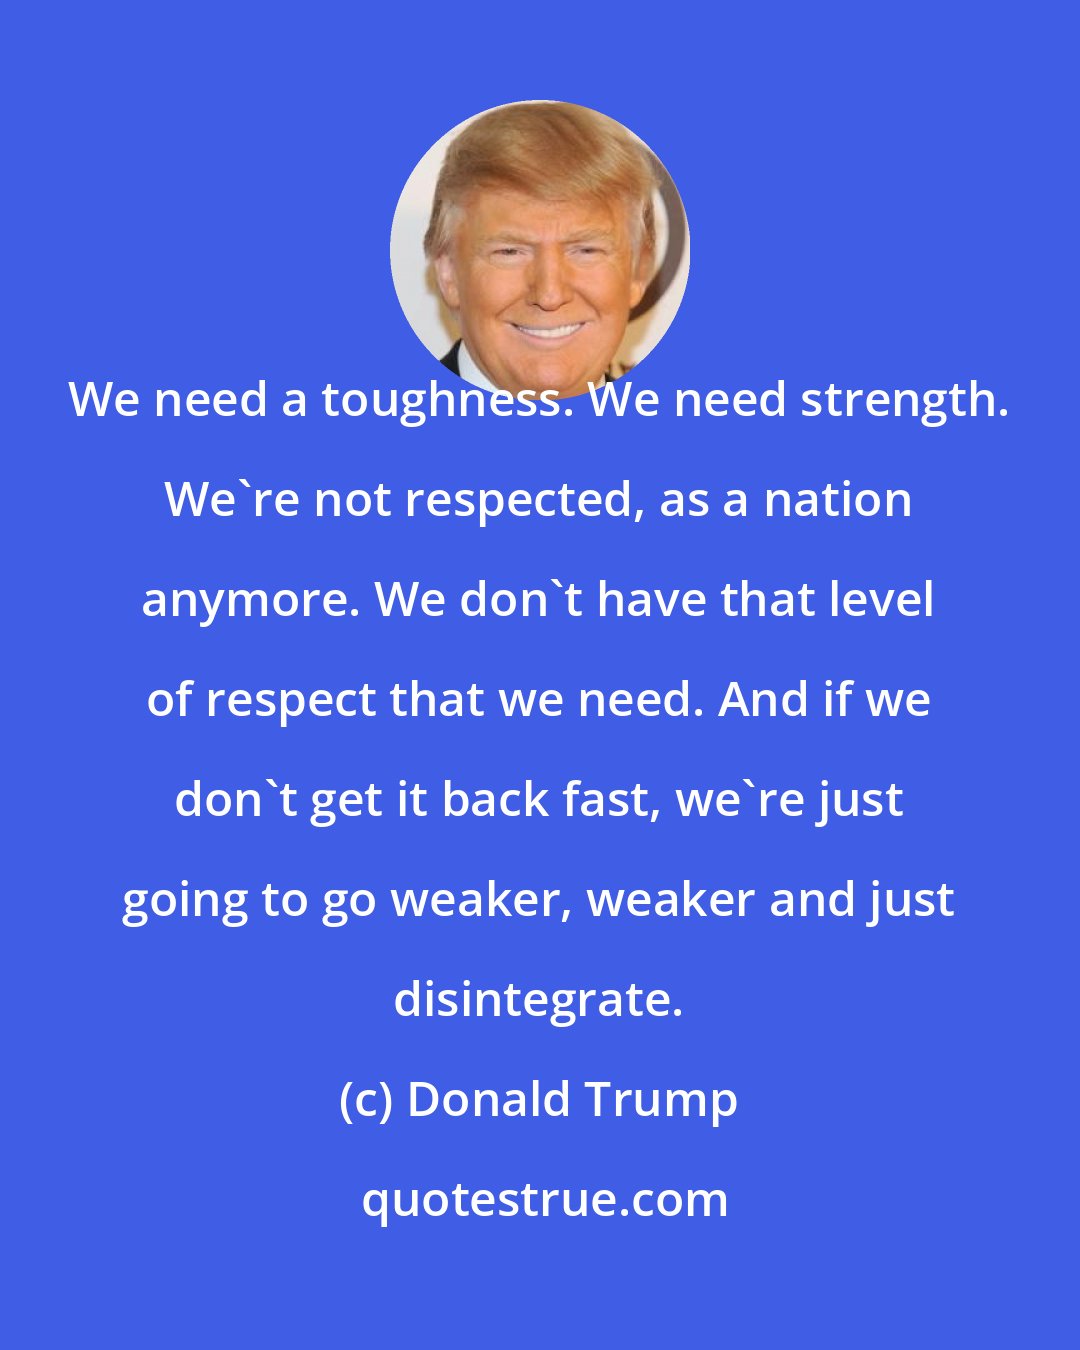 Donald Trump: We need a toughness. We need strength. We're not respected, as a nation anymore. We don't have that level of respect that we need. And if we don't get it back fast, we're just going to go weaker, weaker and just disintegrate.